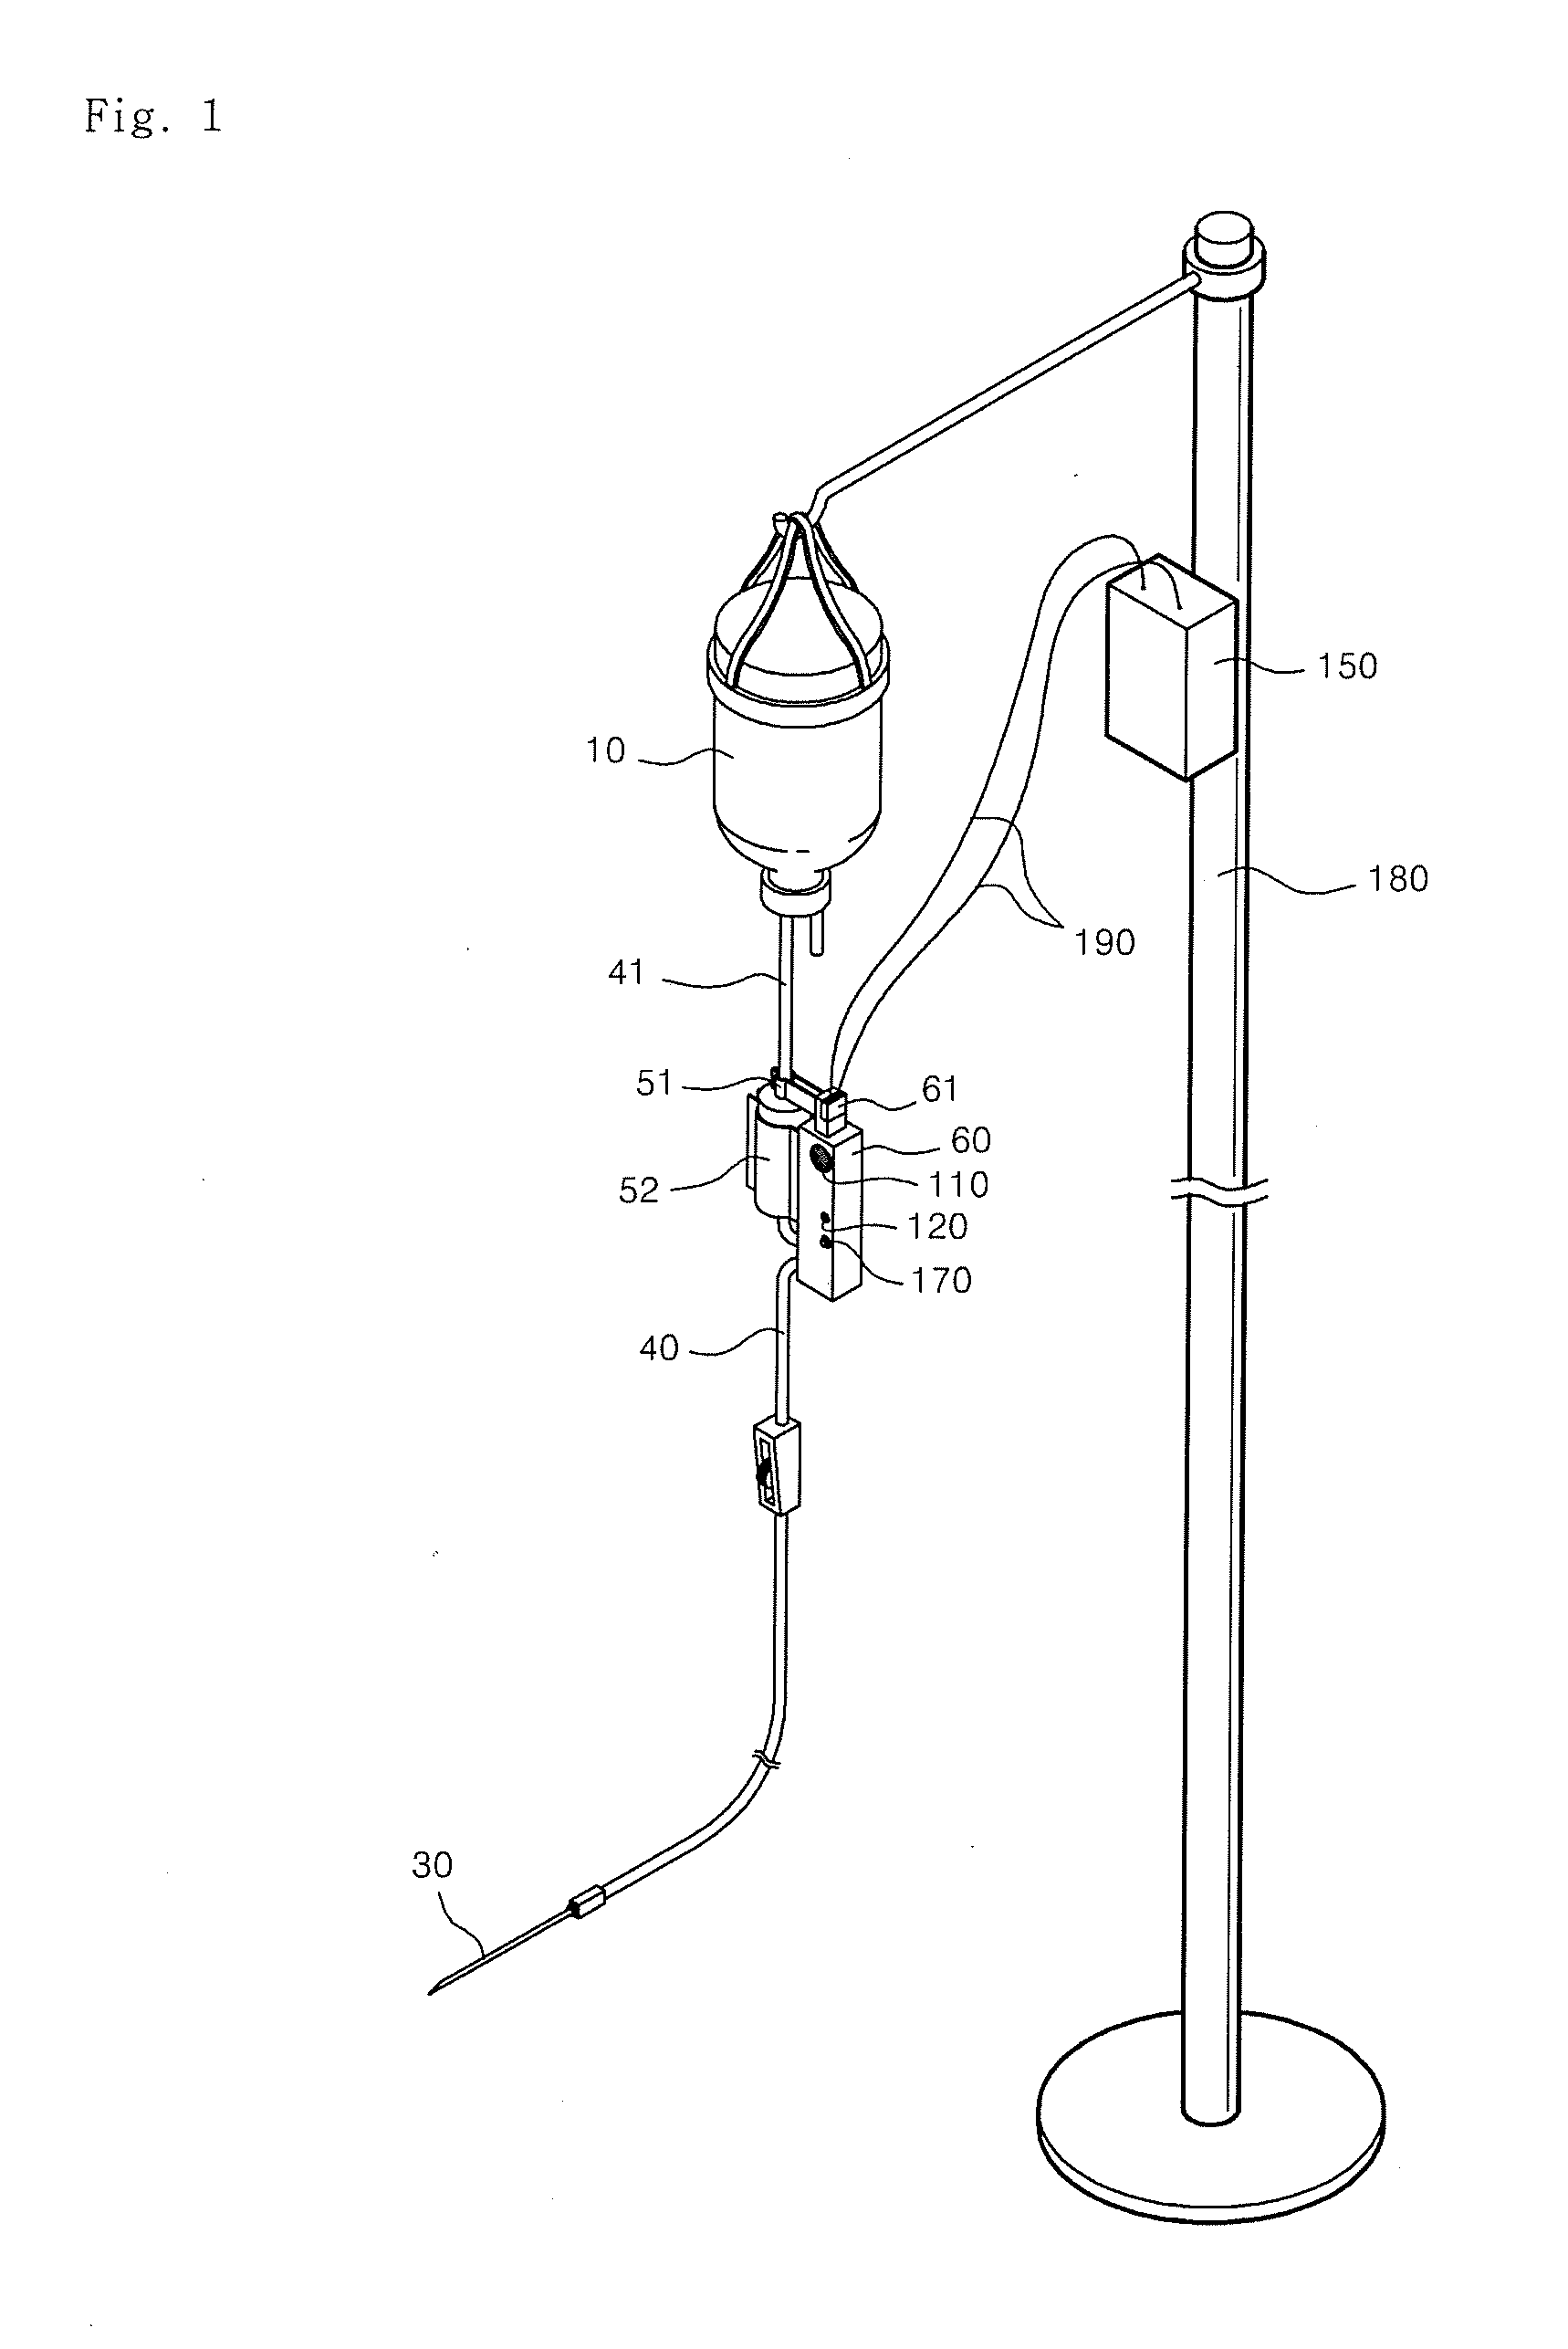 Device for controlling injection of ringer's solution